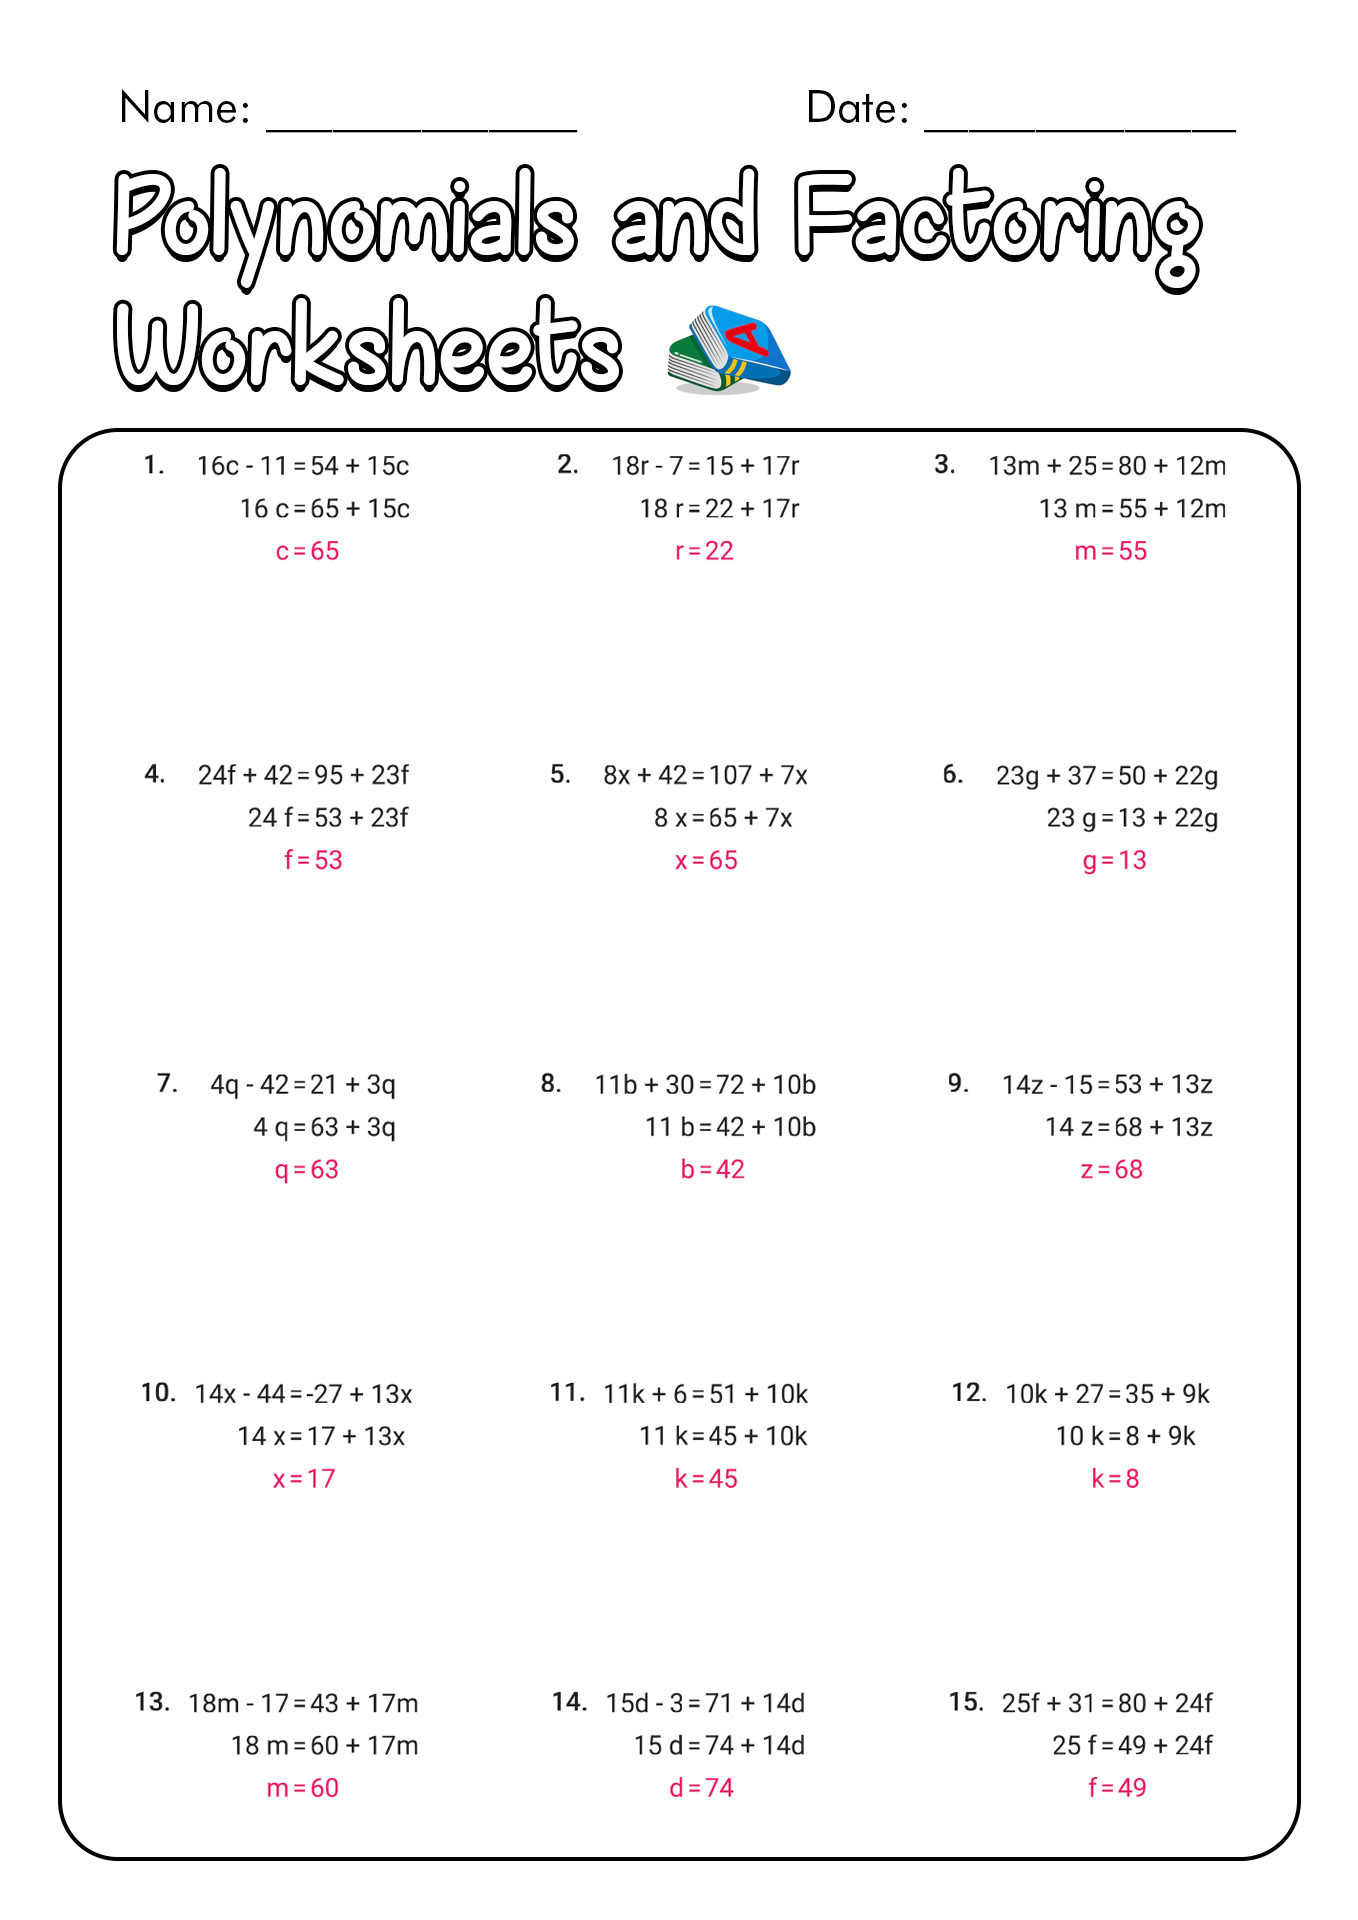 Polynomials and Factoring Practice Worksheet Answers